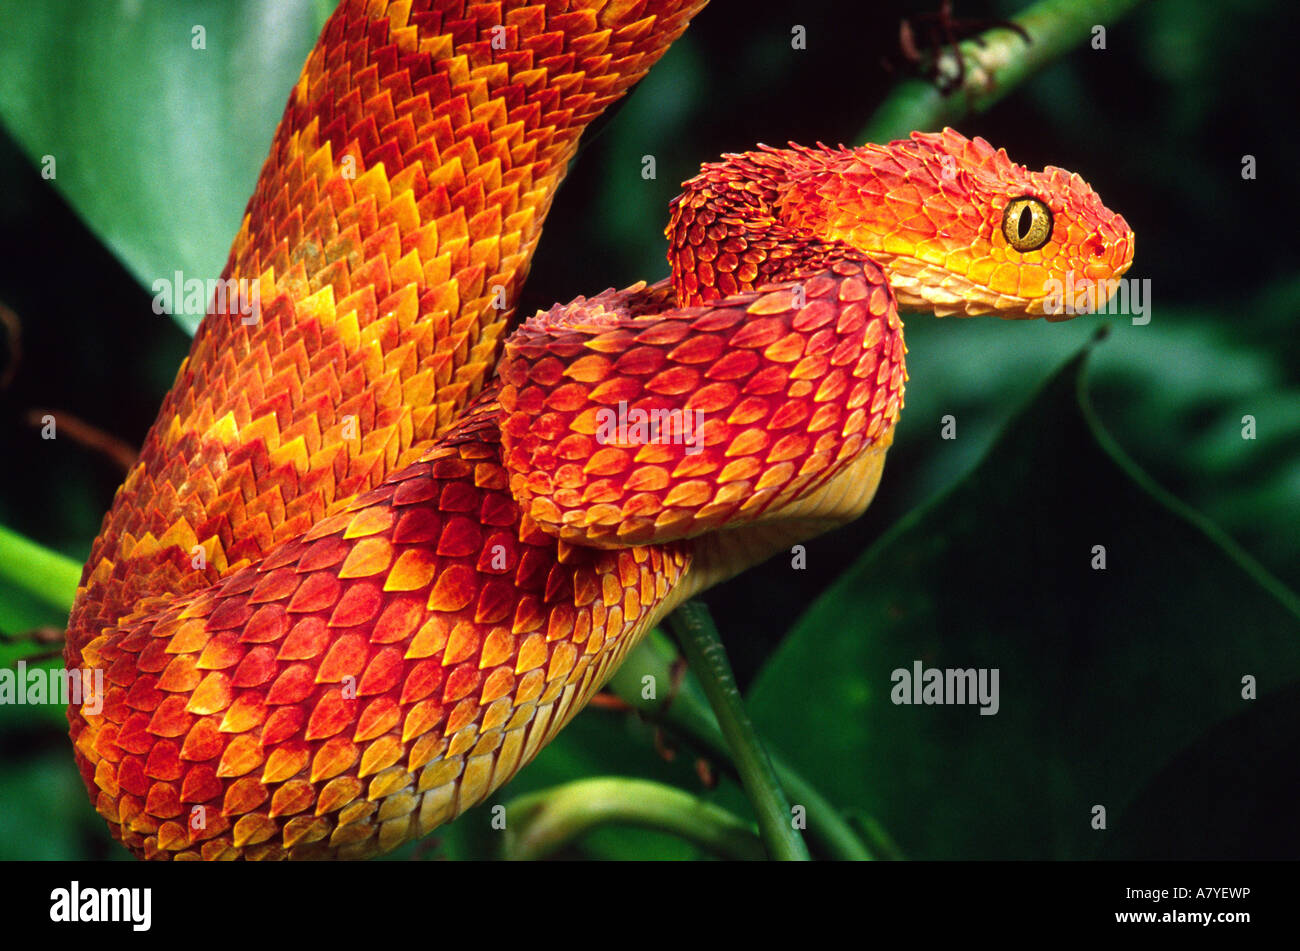 Atheris - African Bush Vipers by MountainLygon on DeviantArt